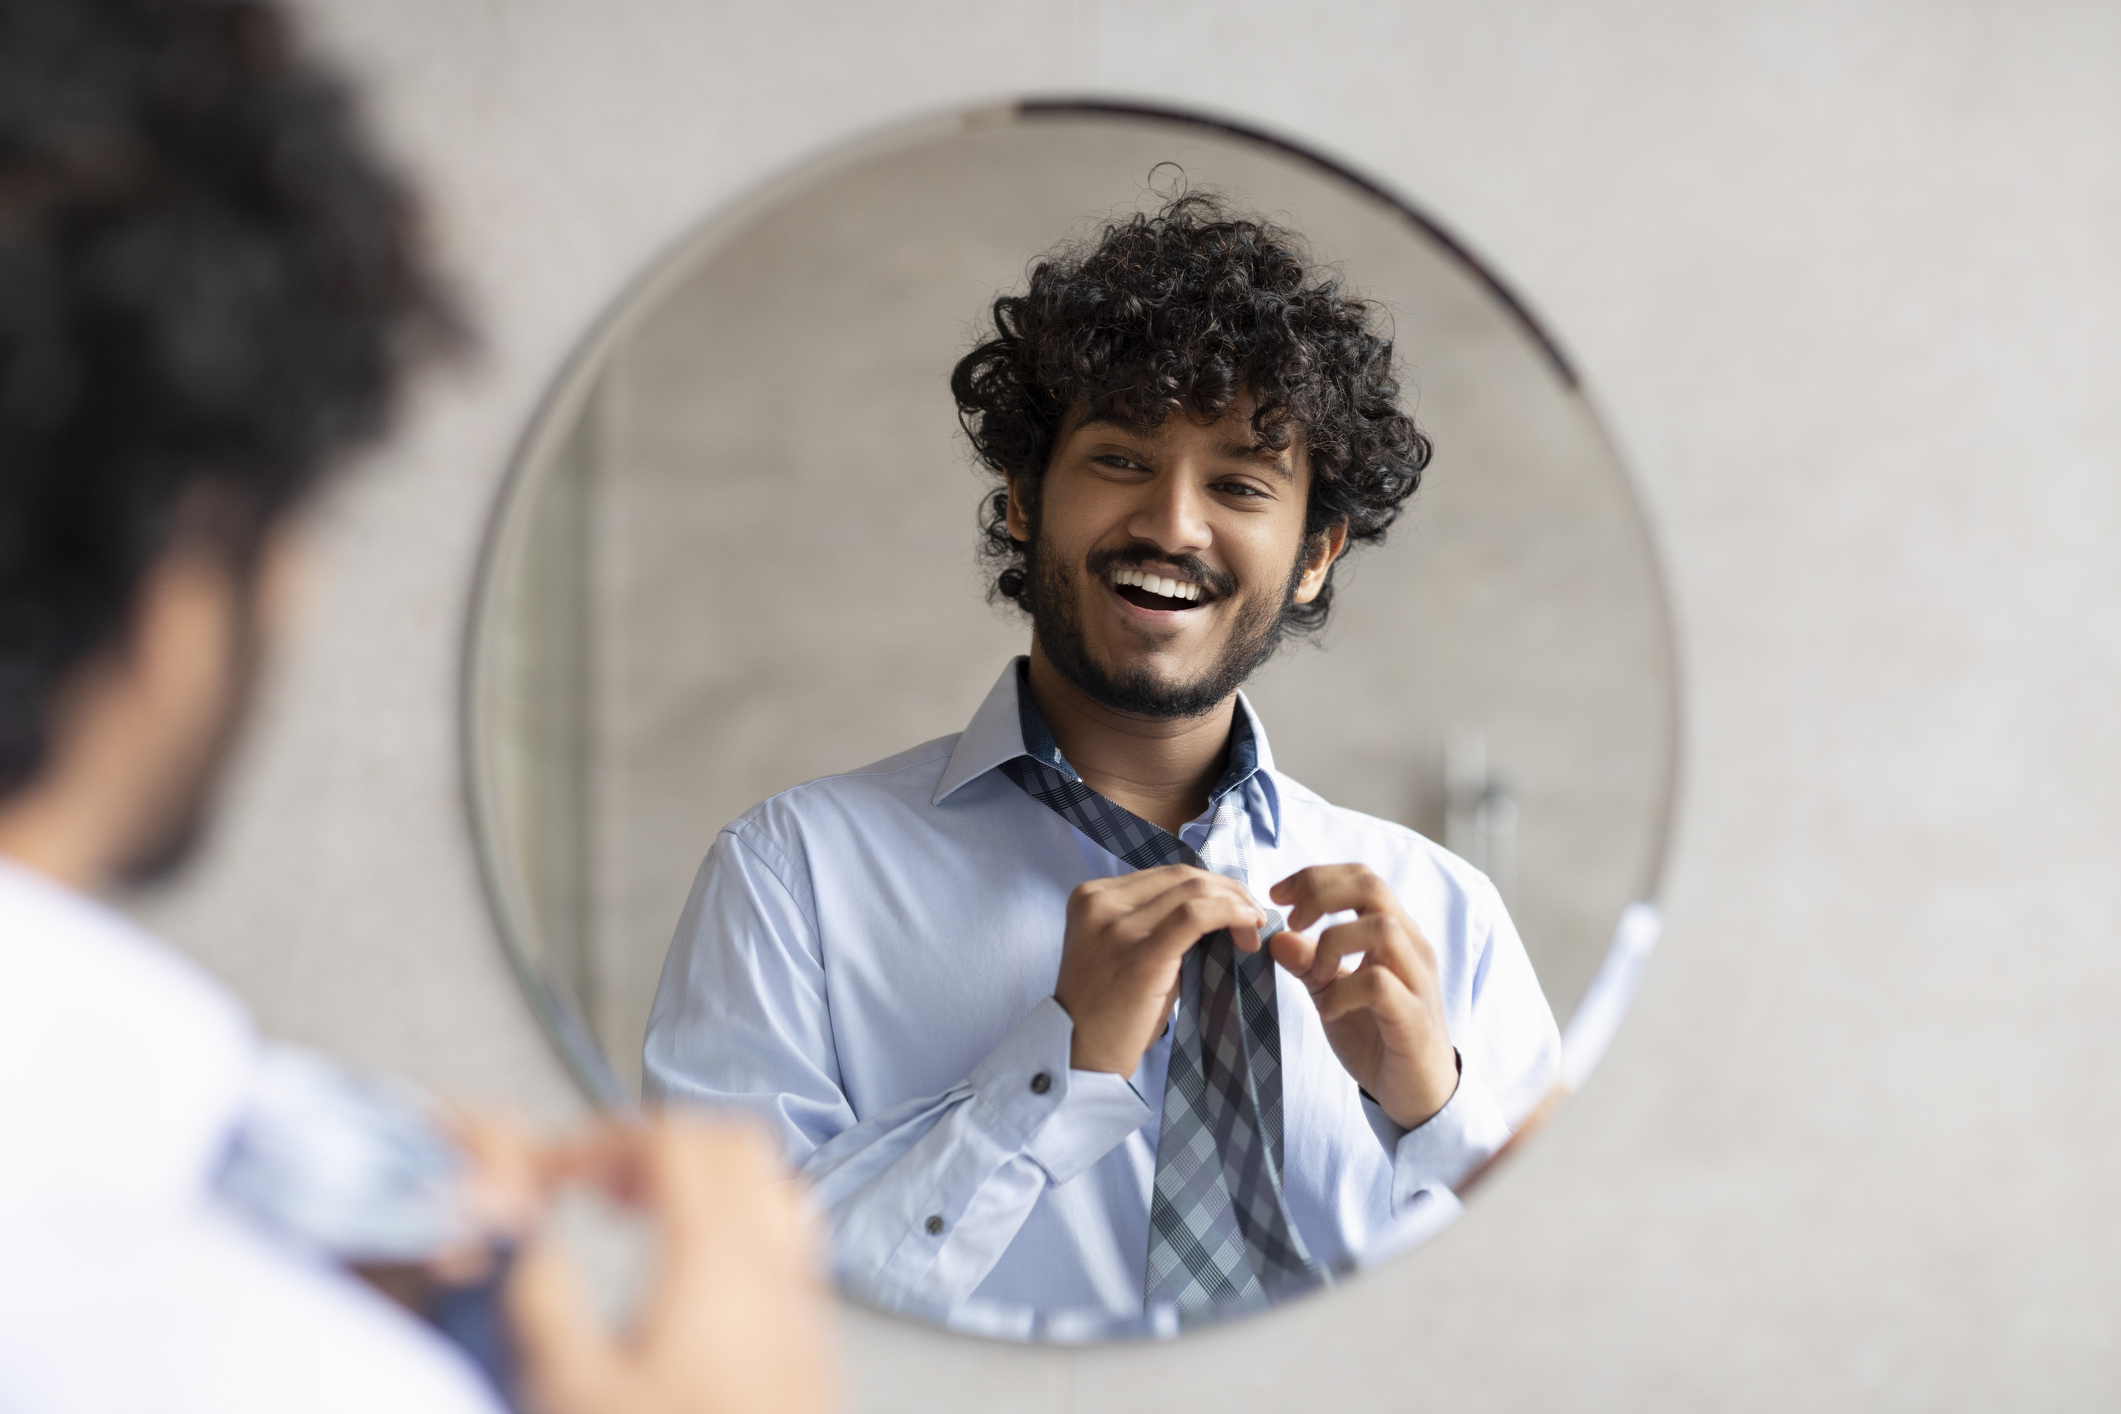 Happy indian man putting on necktie while looking in the mirror and smiling at his reflection, standing in modern bathroom interior, free space